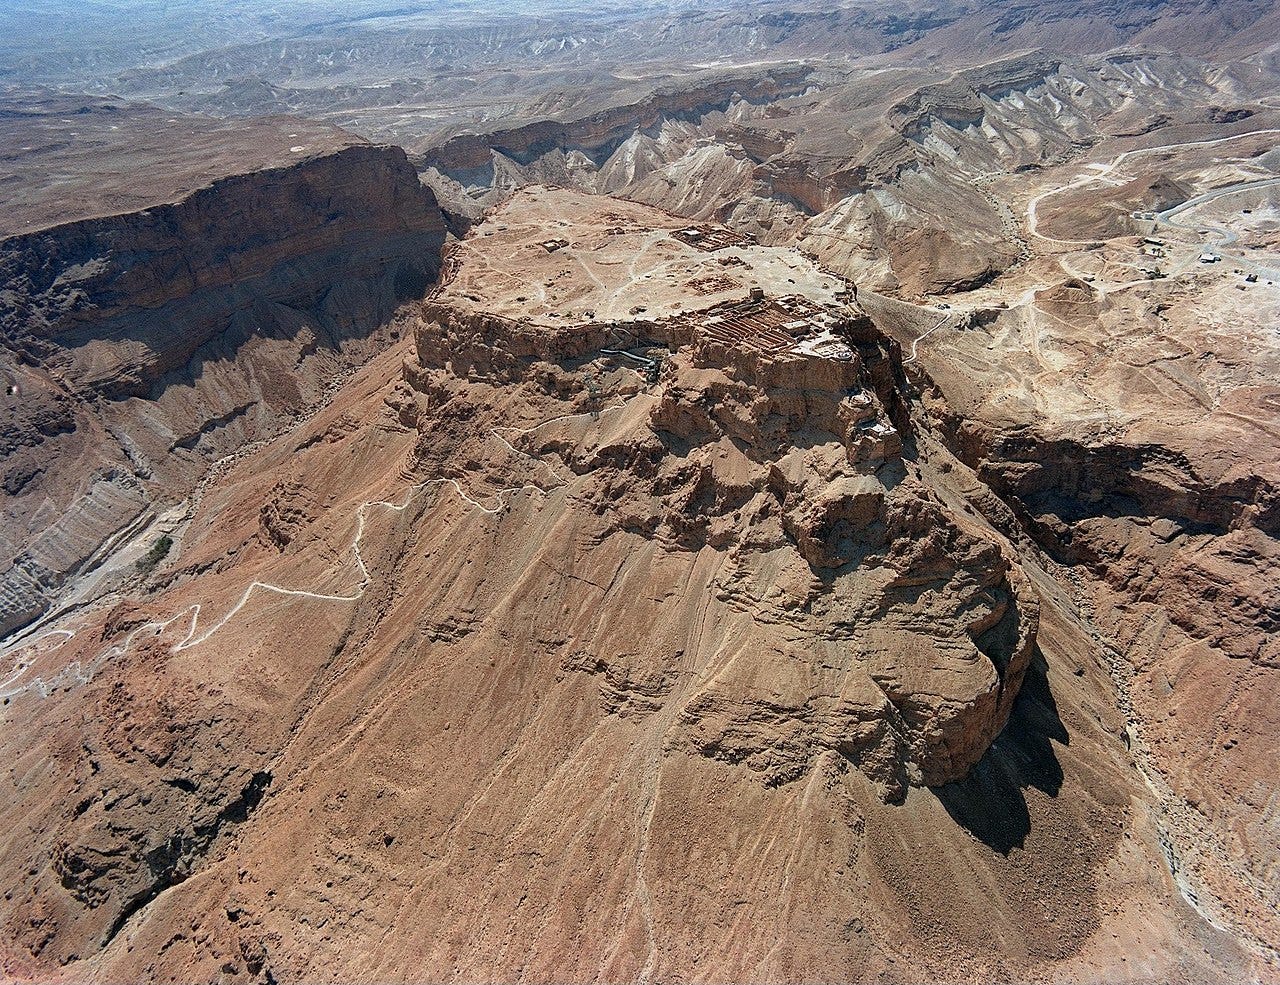 Aerial view showing Masada and the Snake Path from the northeast